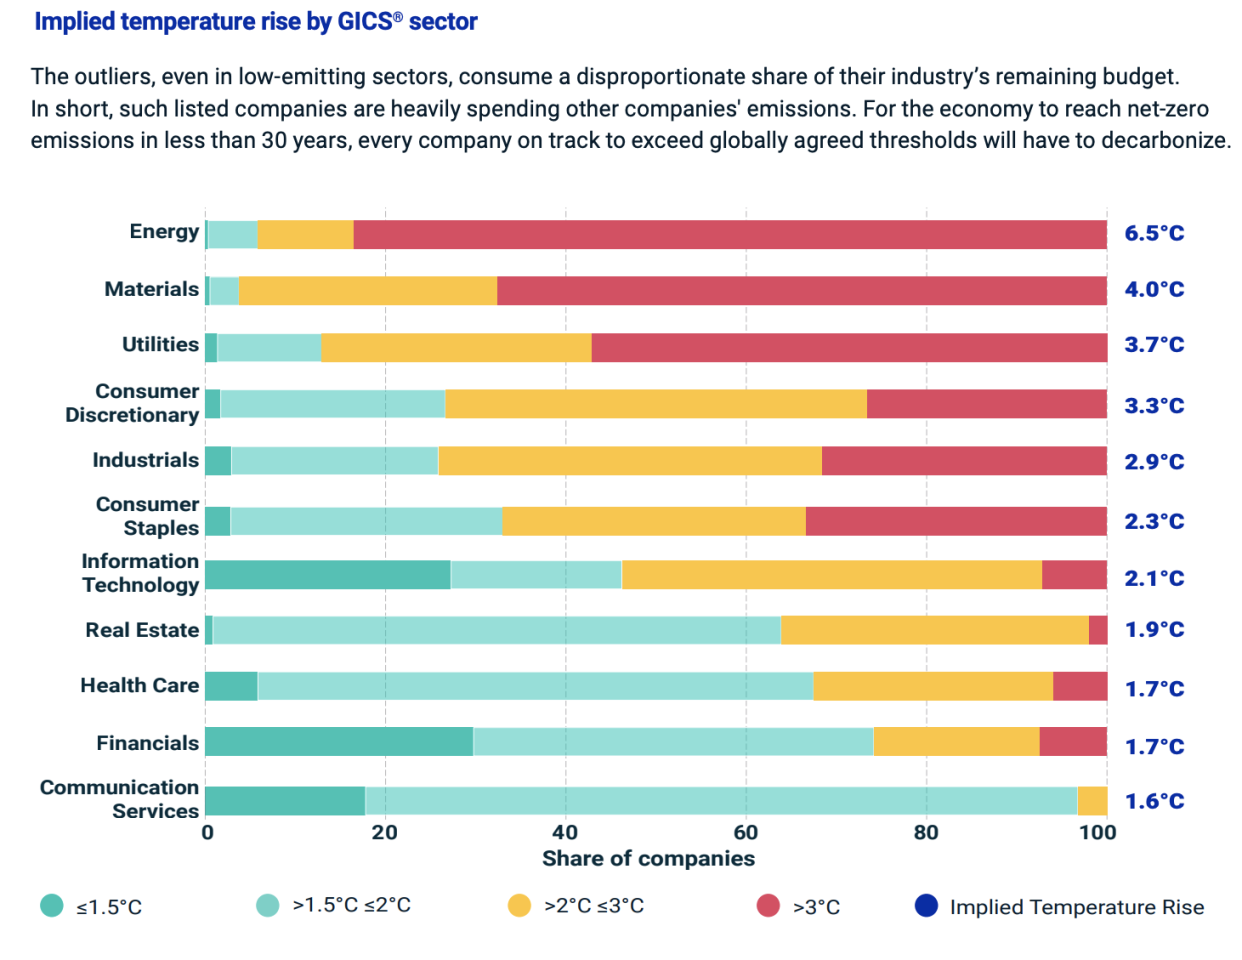 The implied temperature rise by sector. (Source: MSCI)